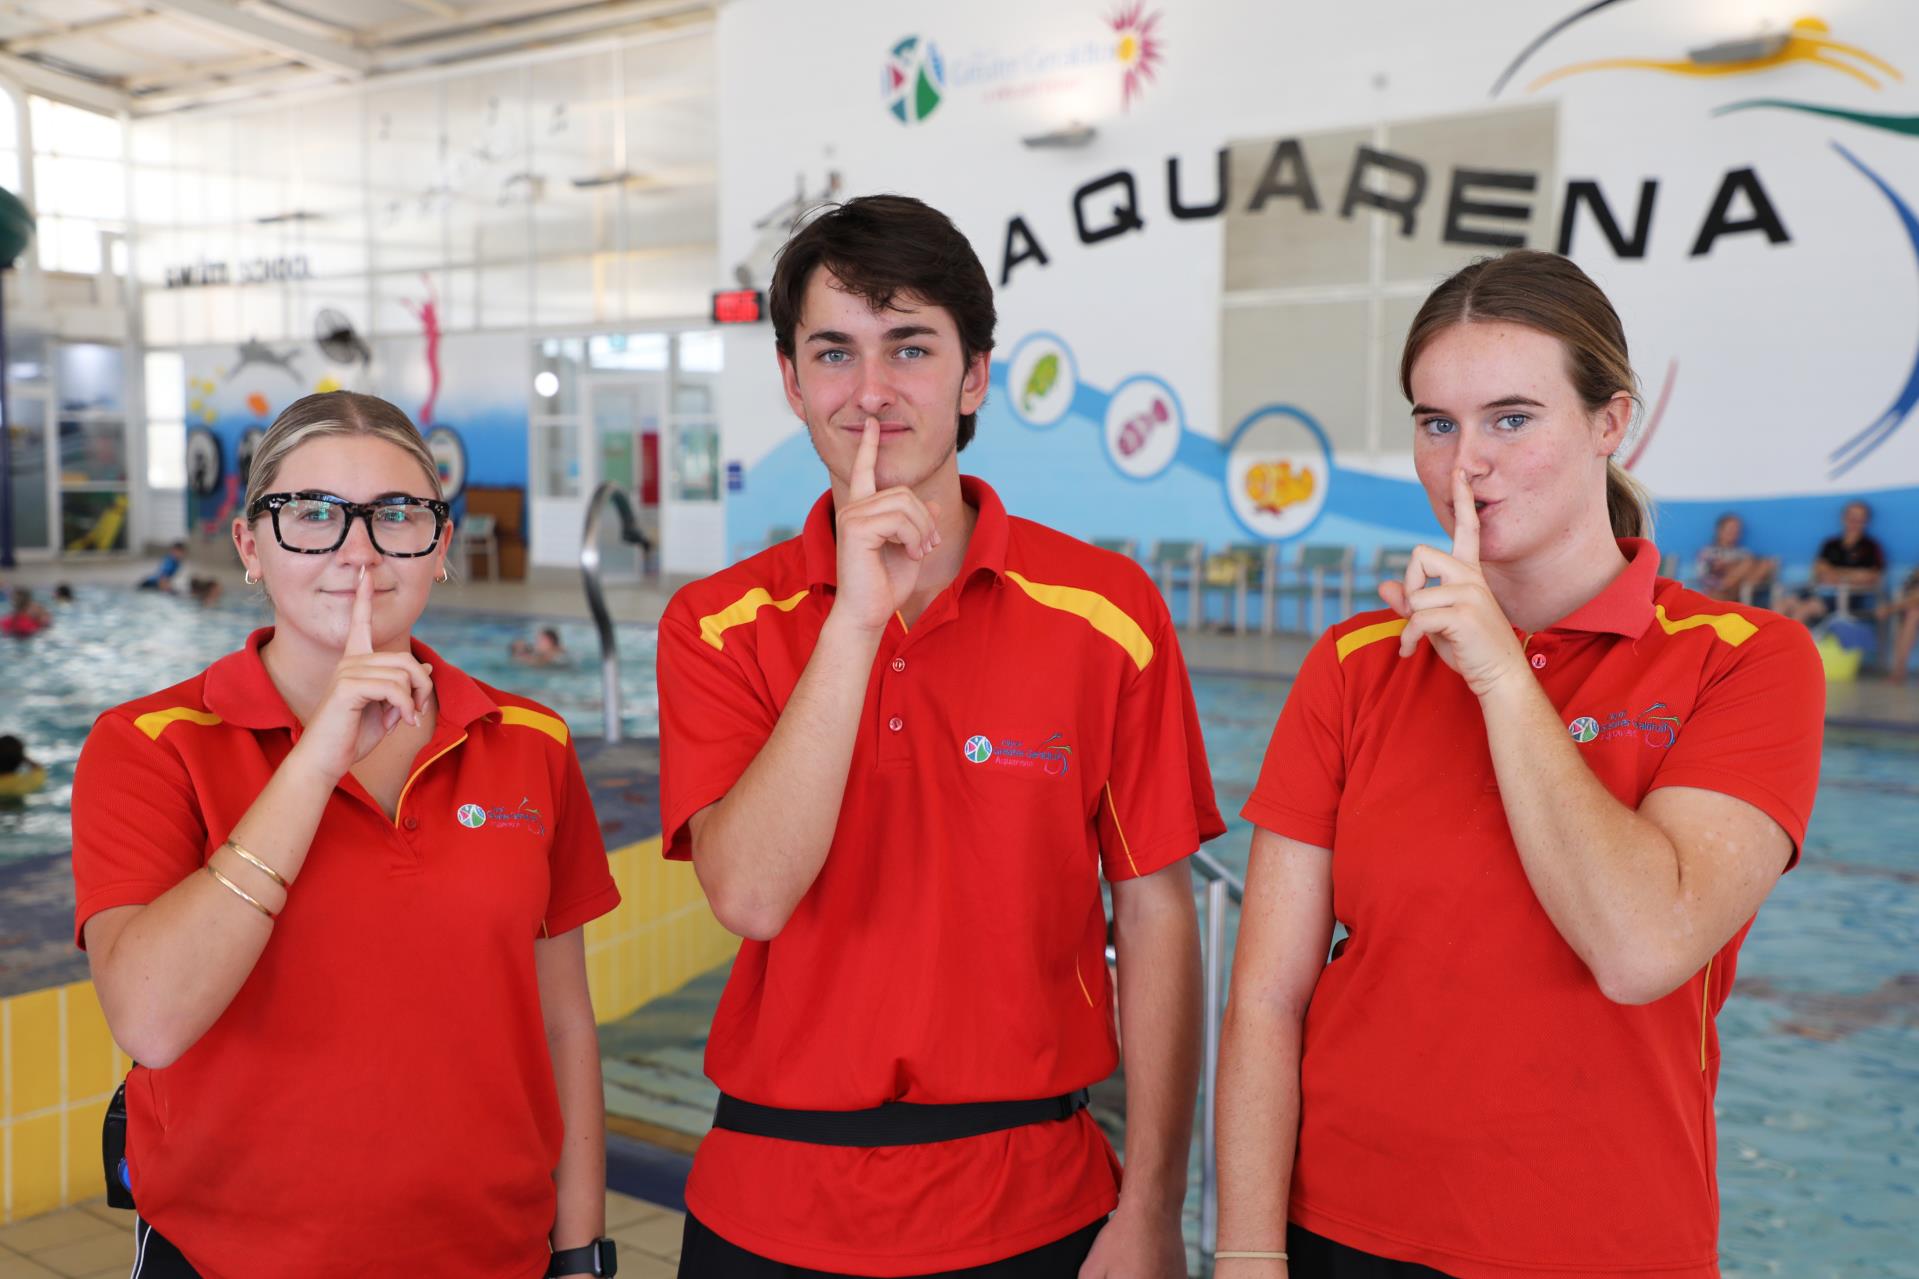 Quiet hour to provide low-sensory experience at Aquarena